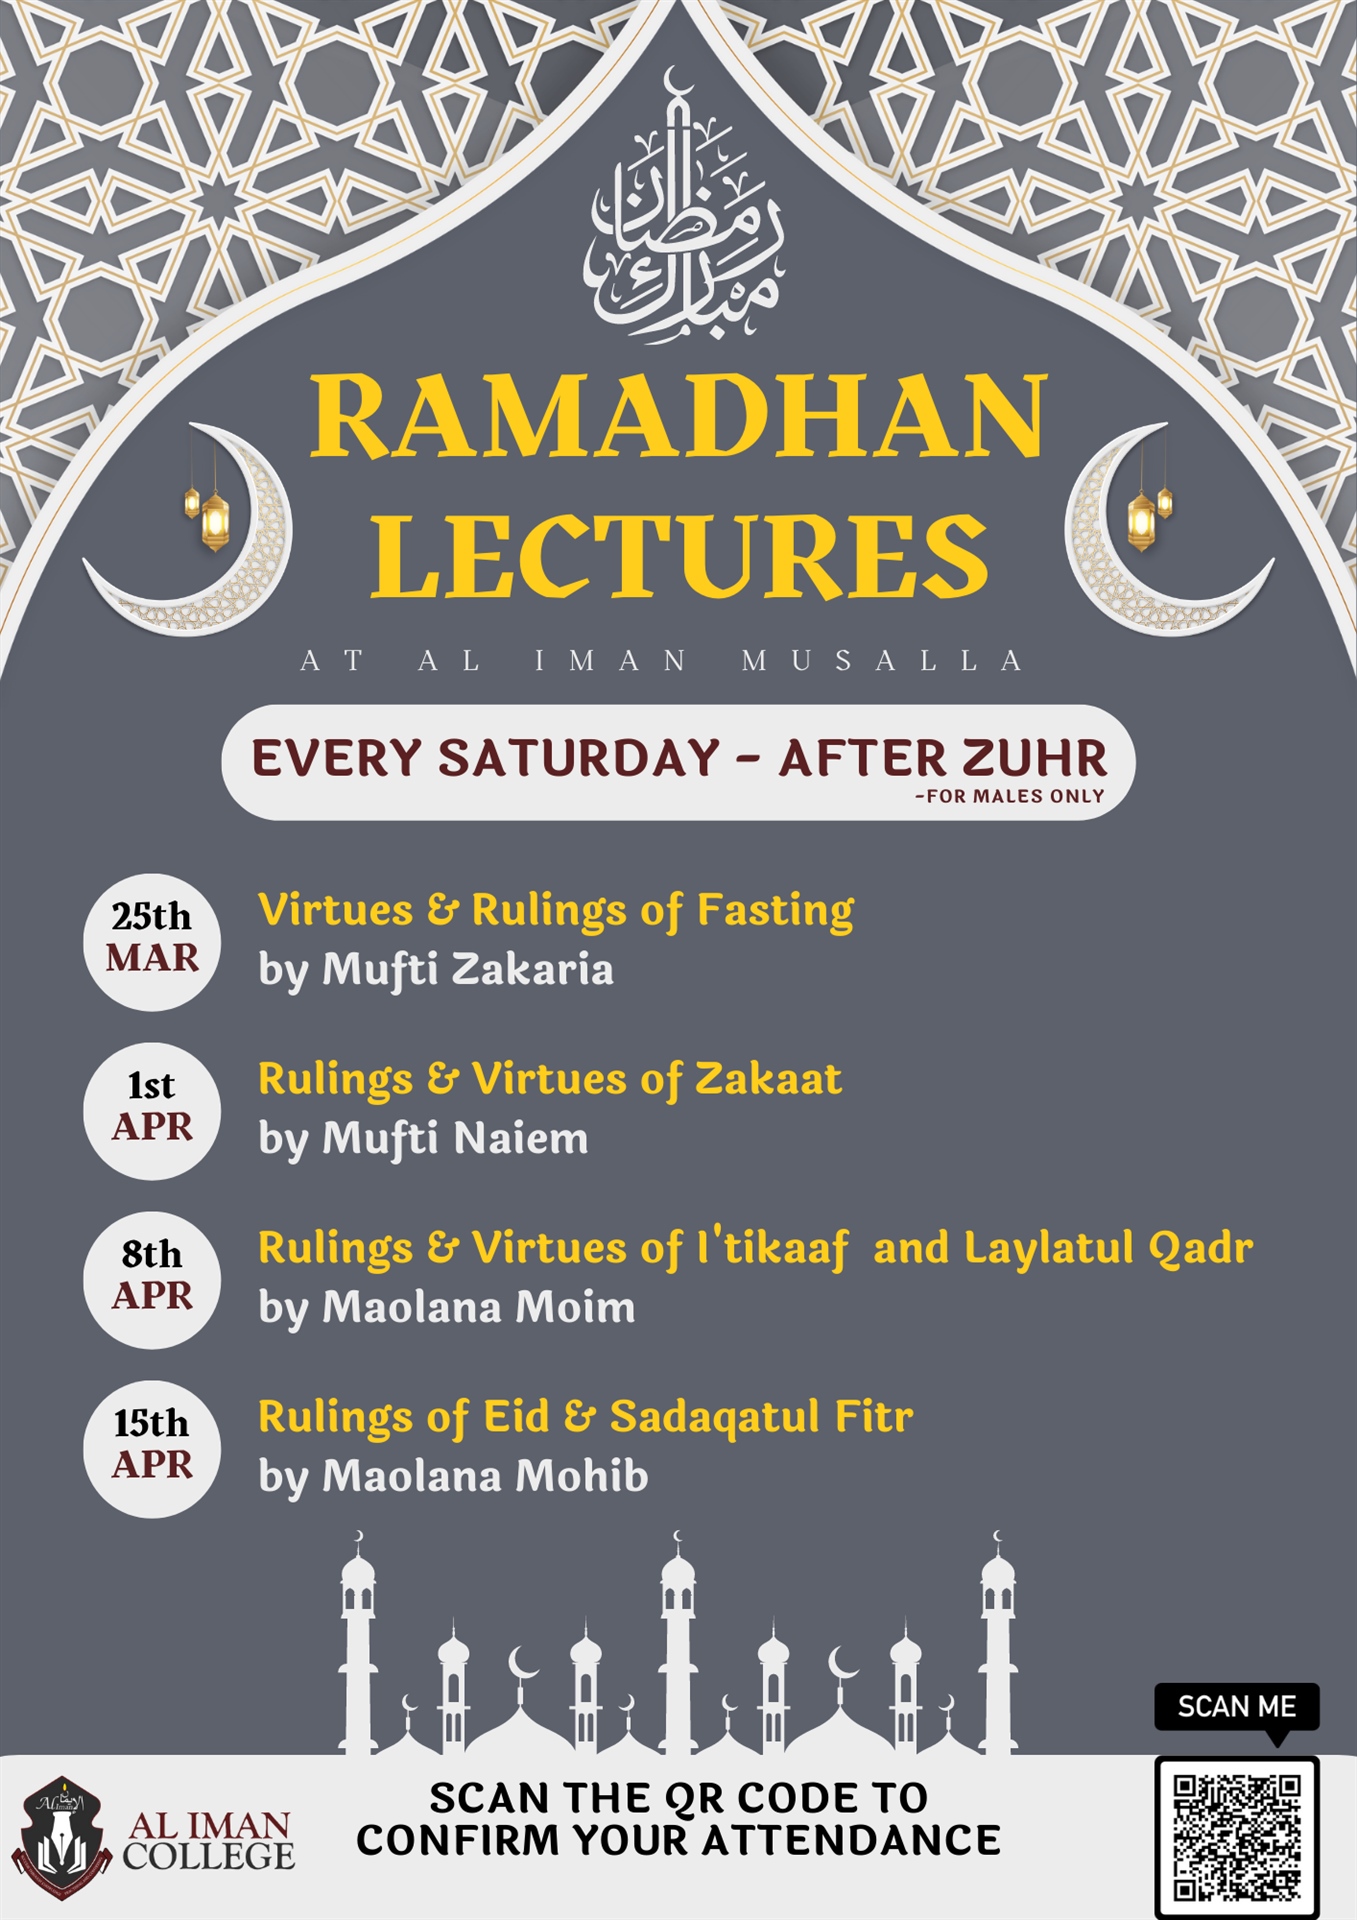 Ramadhan Islamic Lectures at Al Iman Musalla – Every Saturday (For Males)